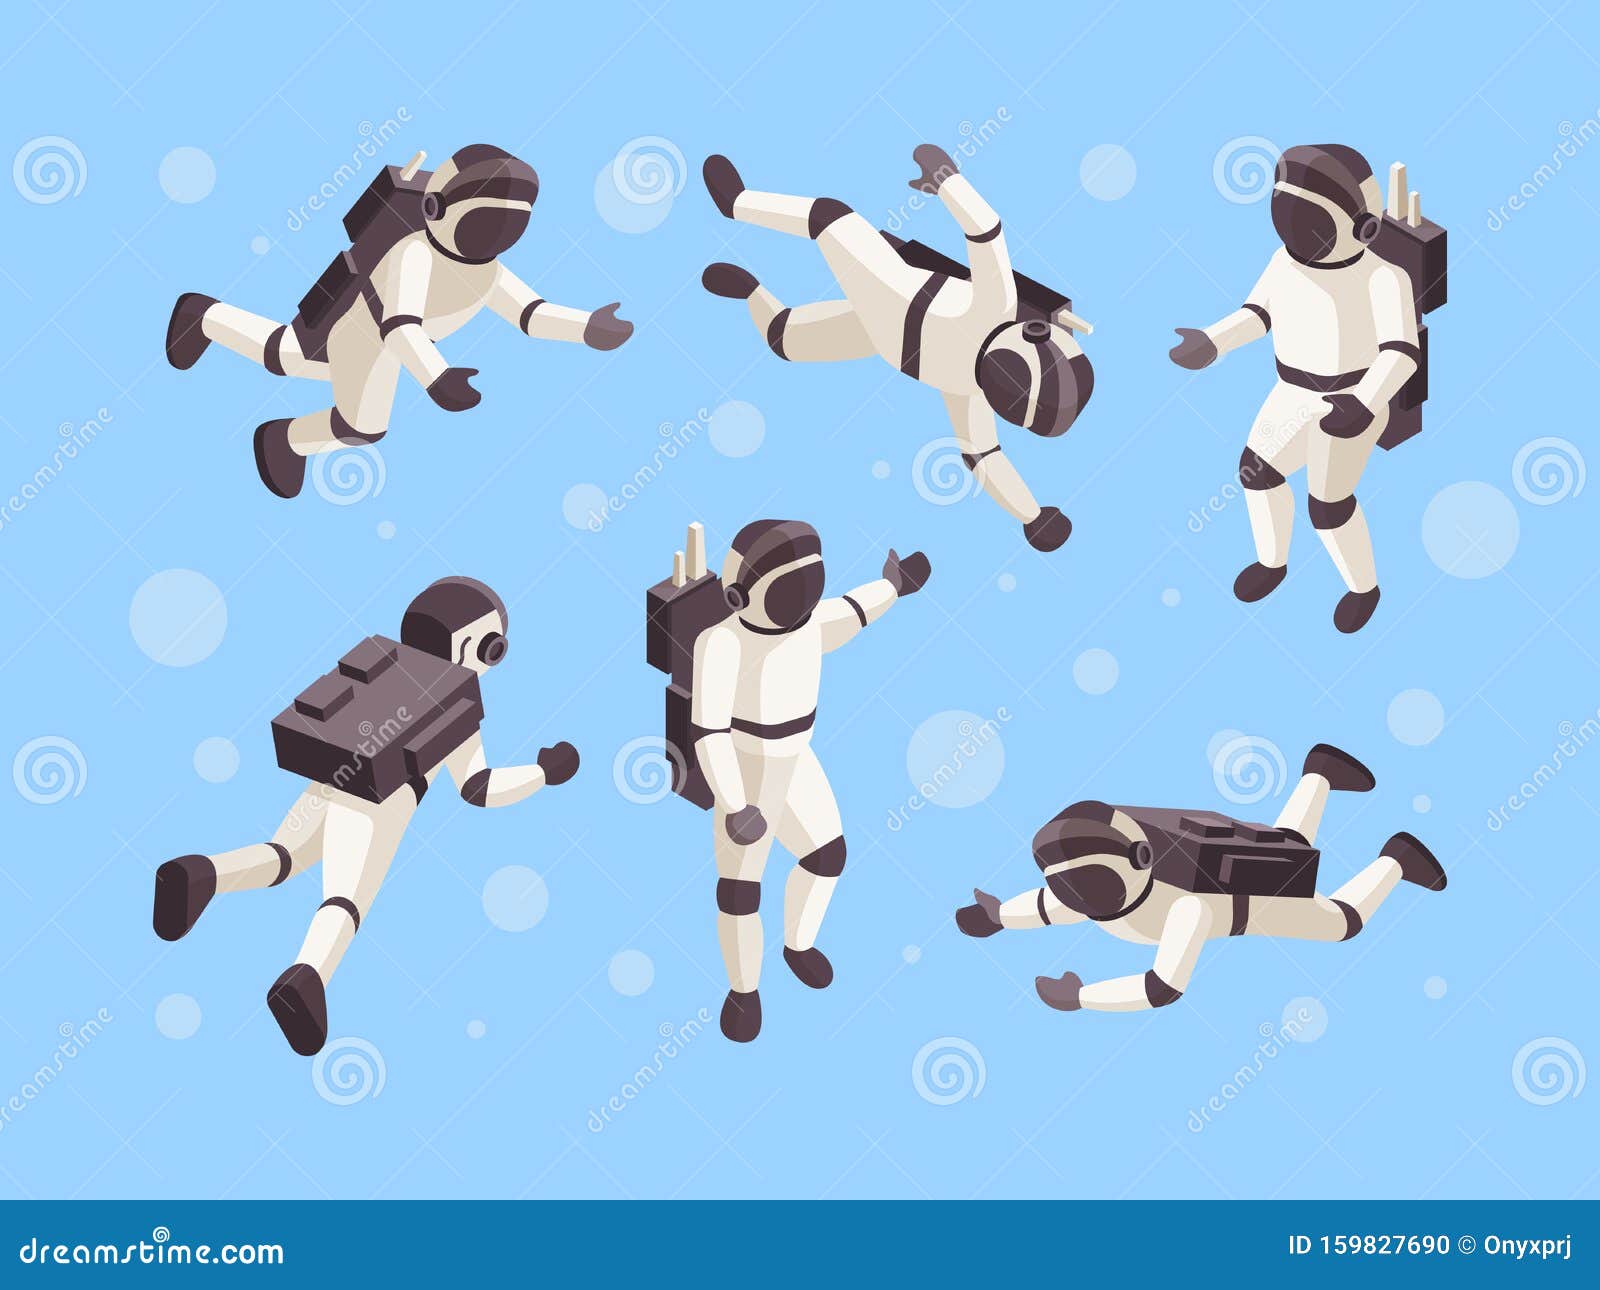 astronaut isometric. cosmo space futuristic human in special clothes  astronaut in different poses